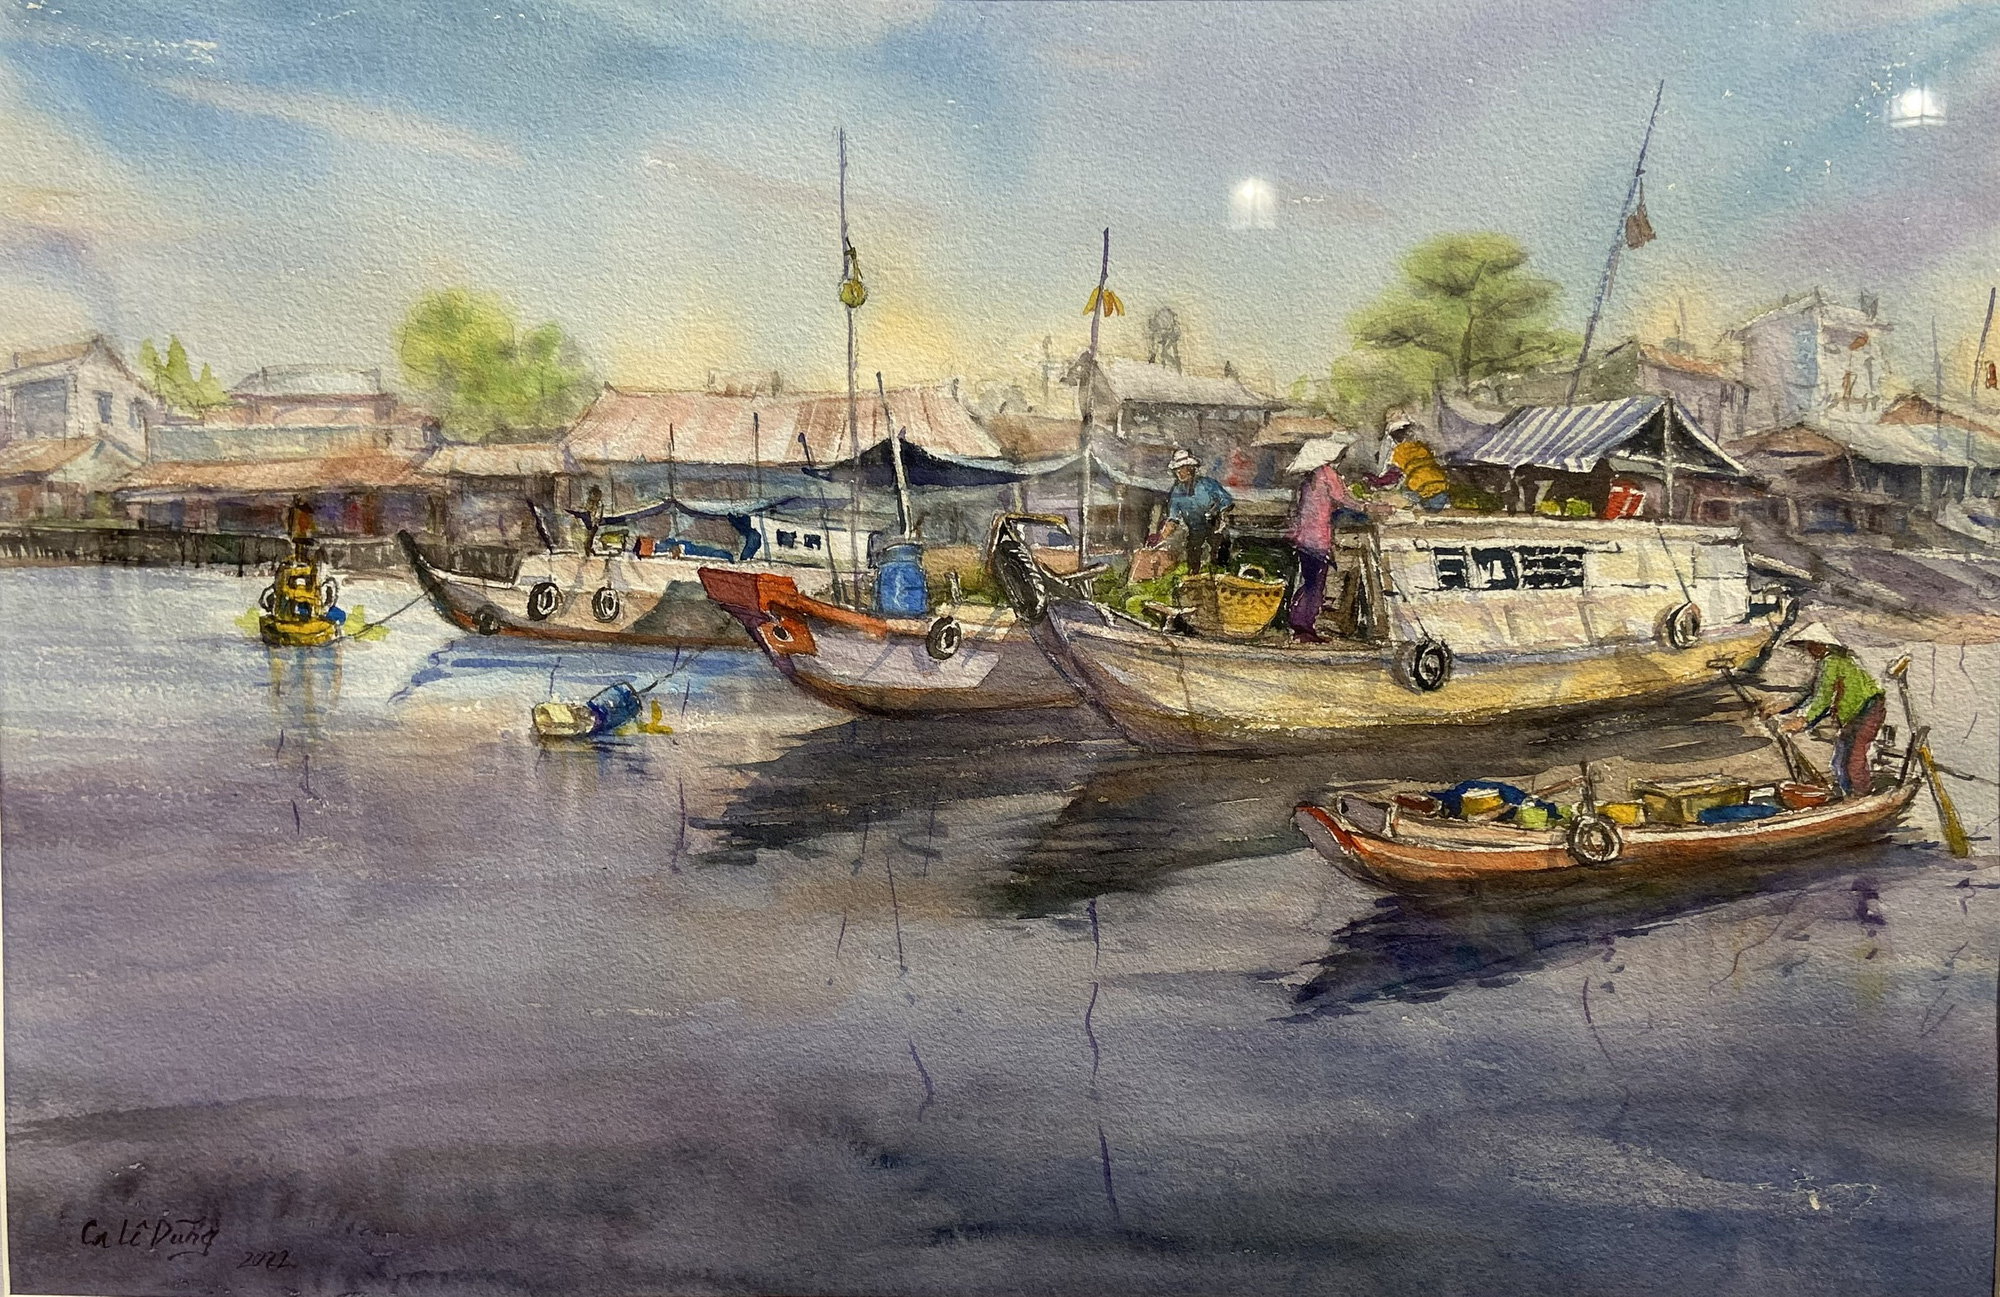 ‘Cai Rang Floating Market, Can Tho’ by artist Ca Le Dung is on display at a watercolor exhibition in Hanoi in May 2023. Photo: T. Dieu / Tuoi Tre